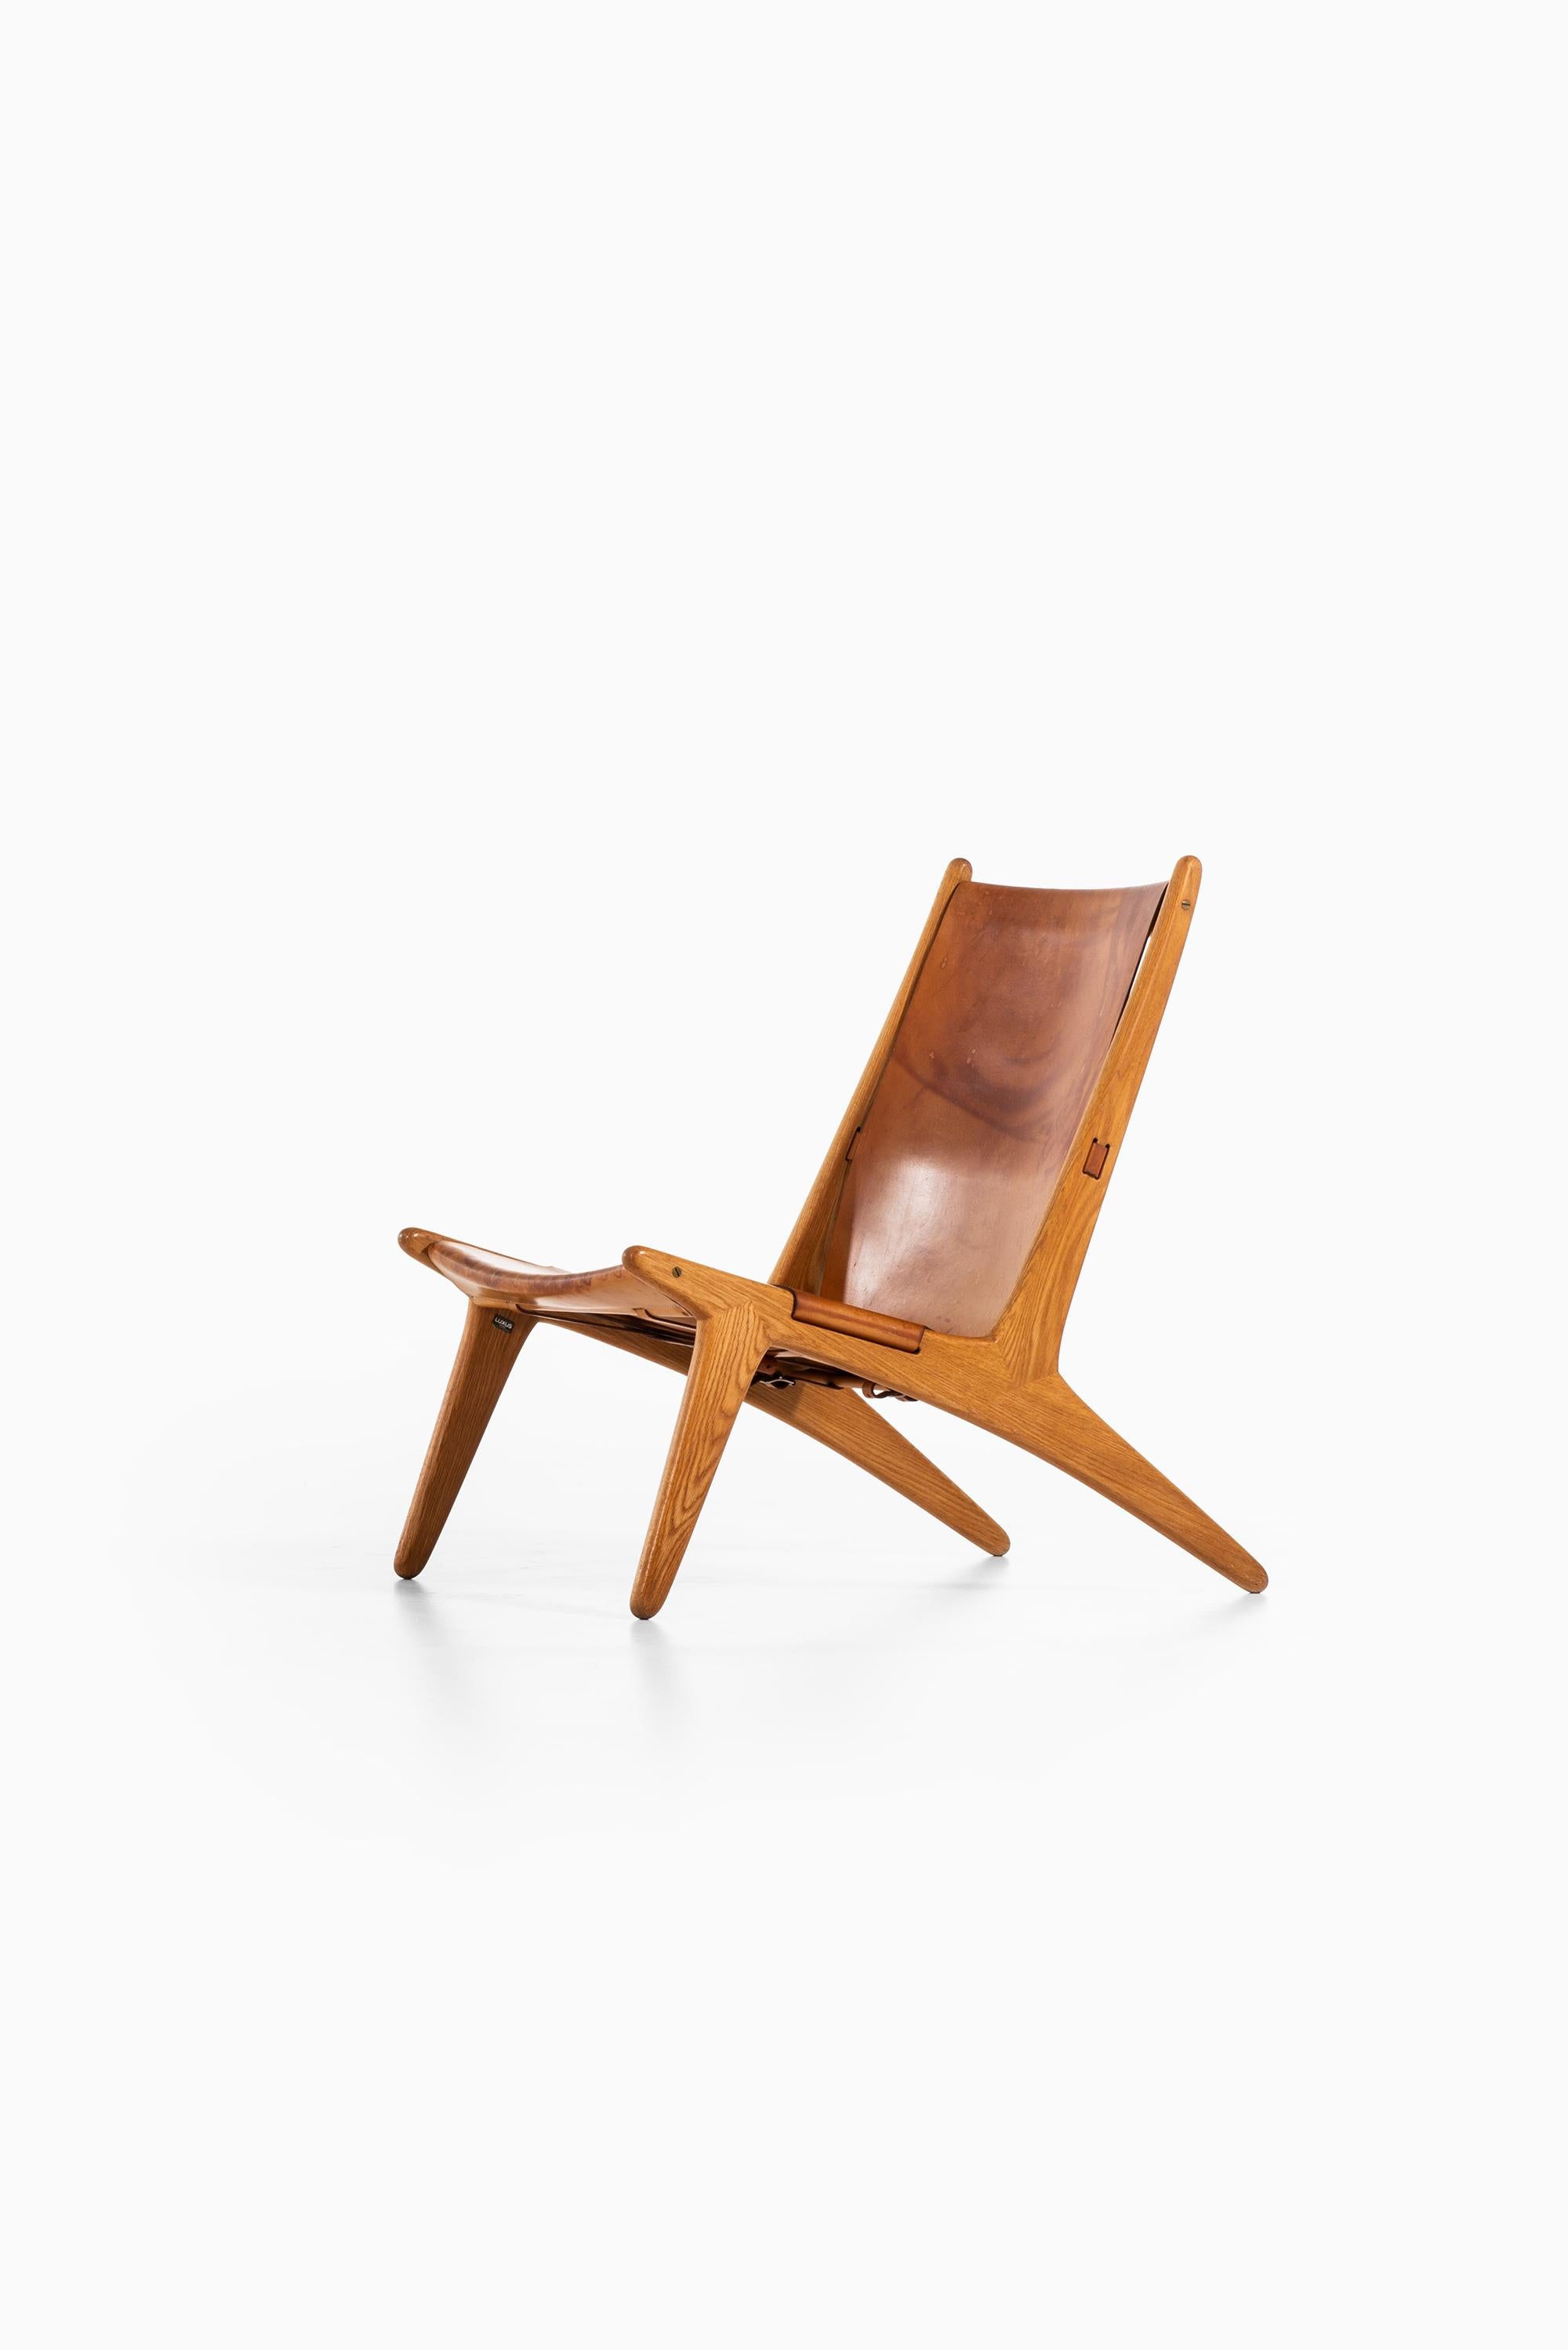 Rare hunting easy chair designed by Uno & Östen Kristiansson. Produced by Luxus in Vittsjö, Sweden.